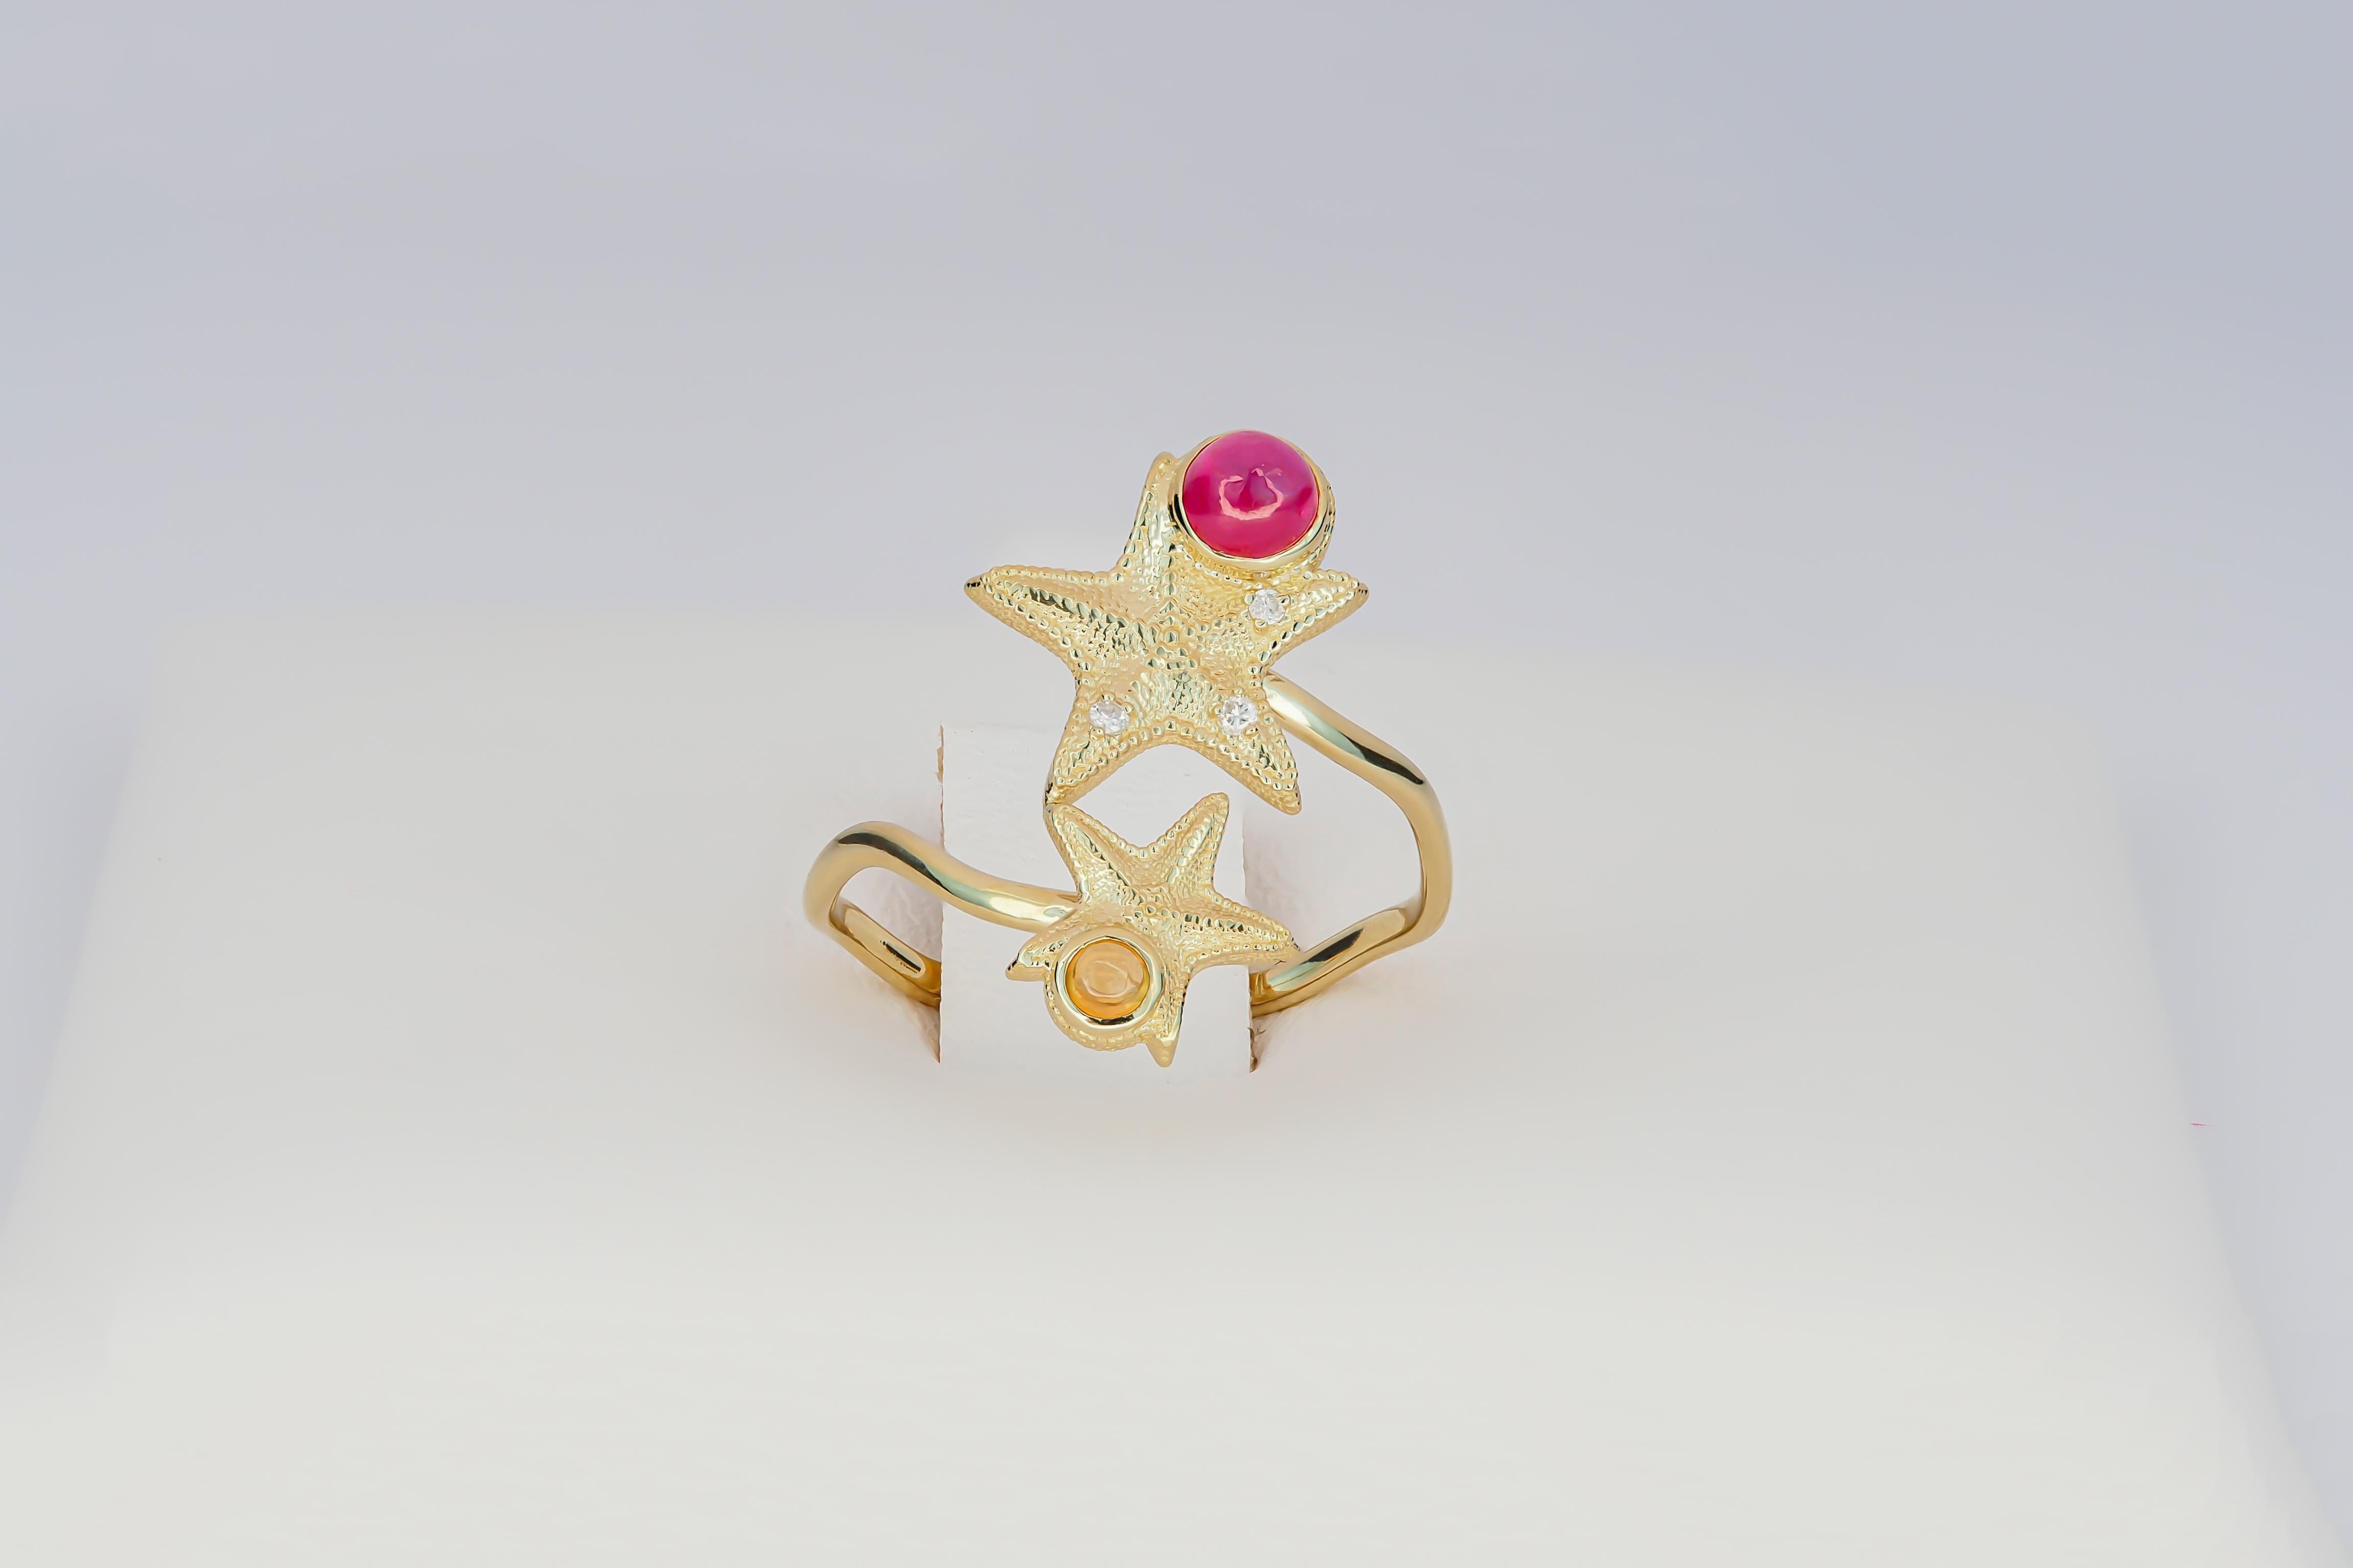 For Sale:   Ruby and Sapphire cabochon ring in 14 karat gold.  Star Fish Ring! 6